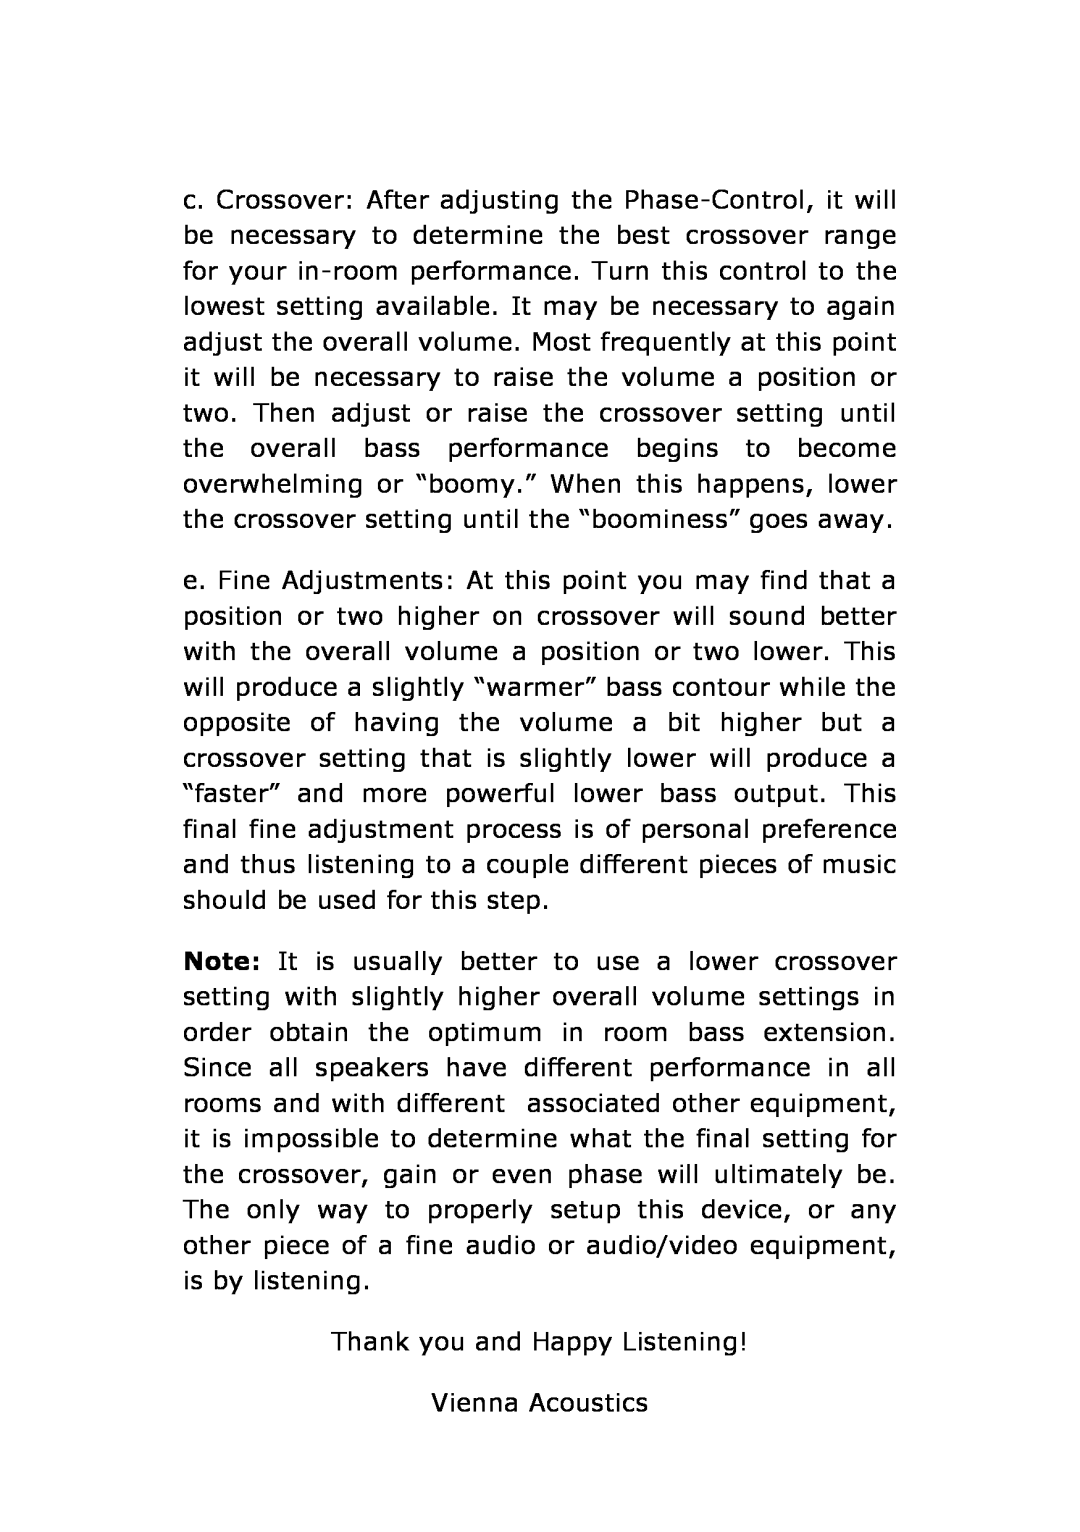 Vienna Acoustics Principal Grand owner manual Thank you and Happy Listening Vienna Acoustics 